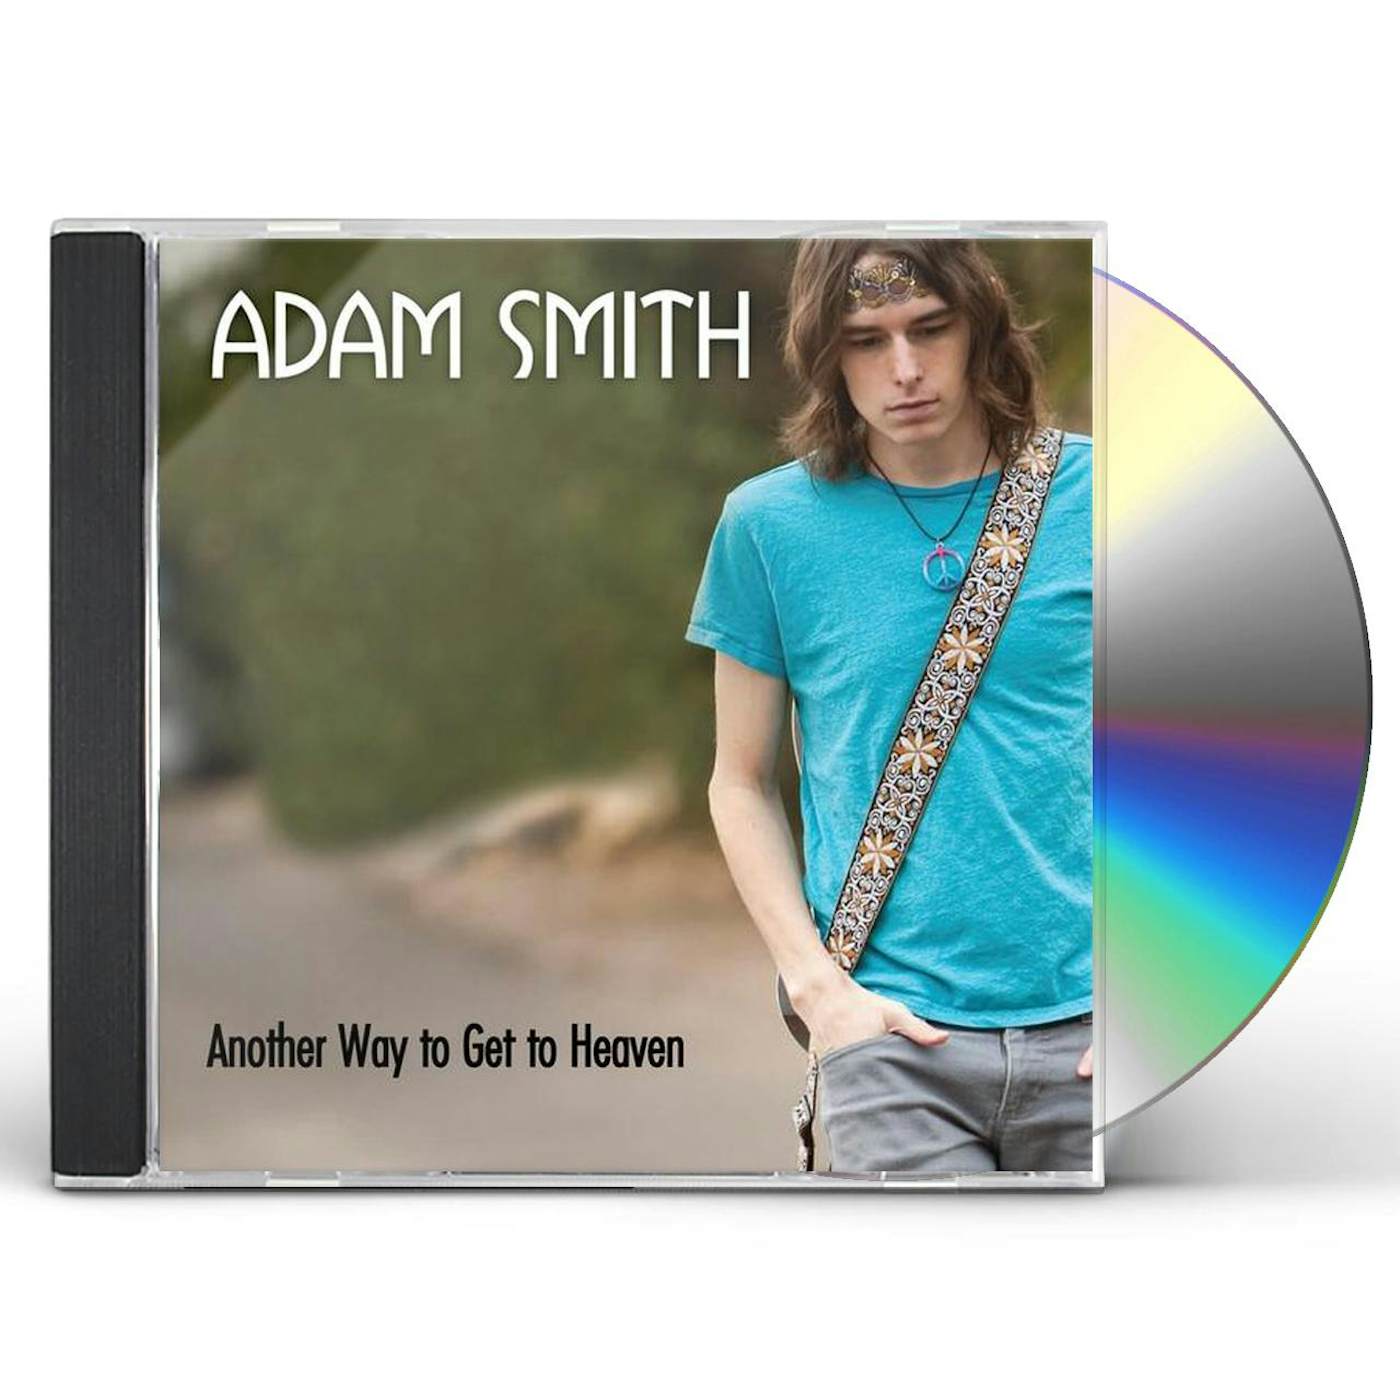 Adam Smith ANOTHER WAY TO GET TO HEAVEN CD